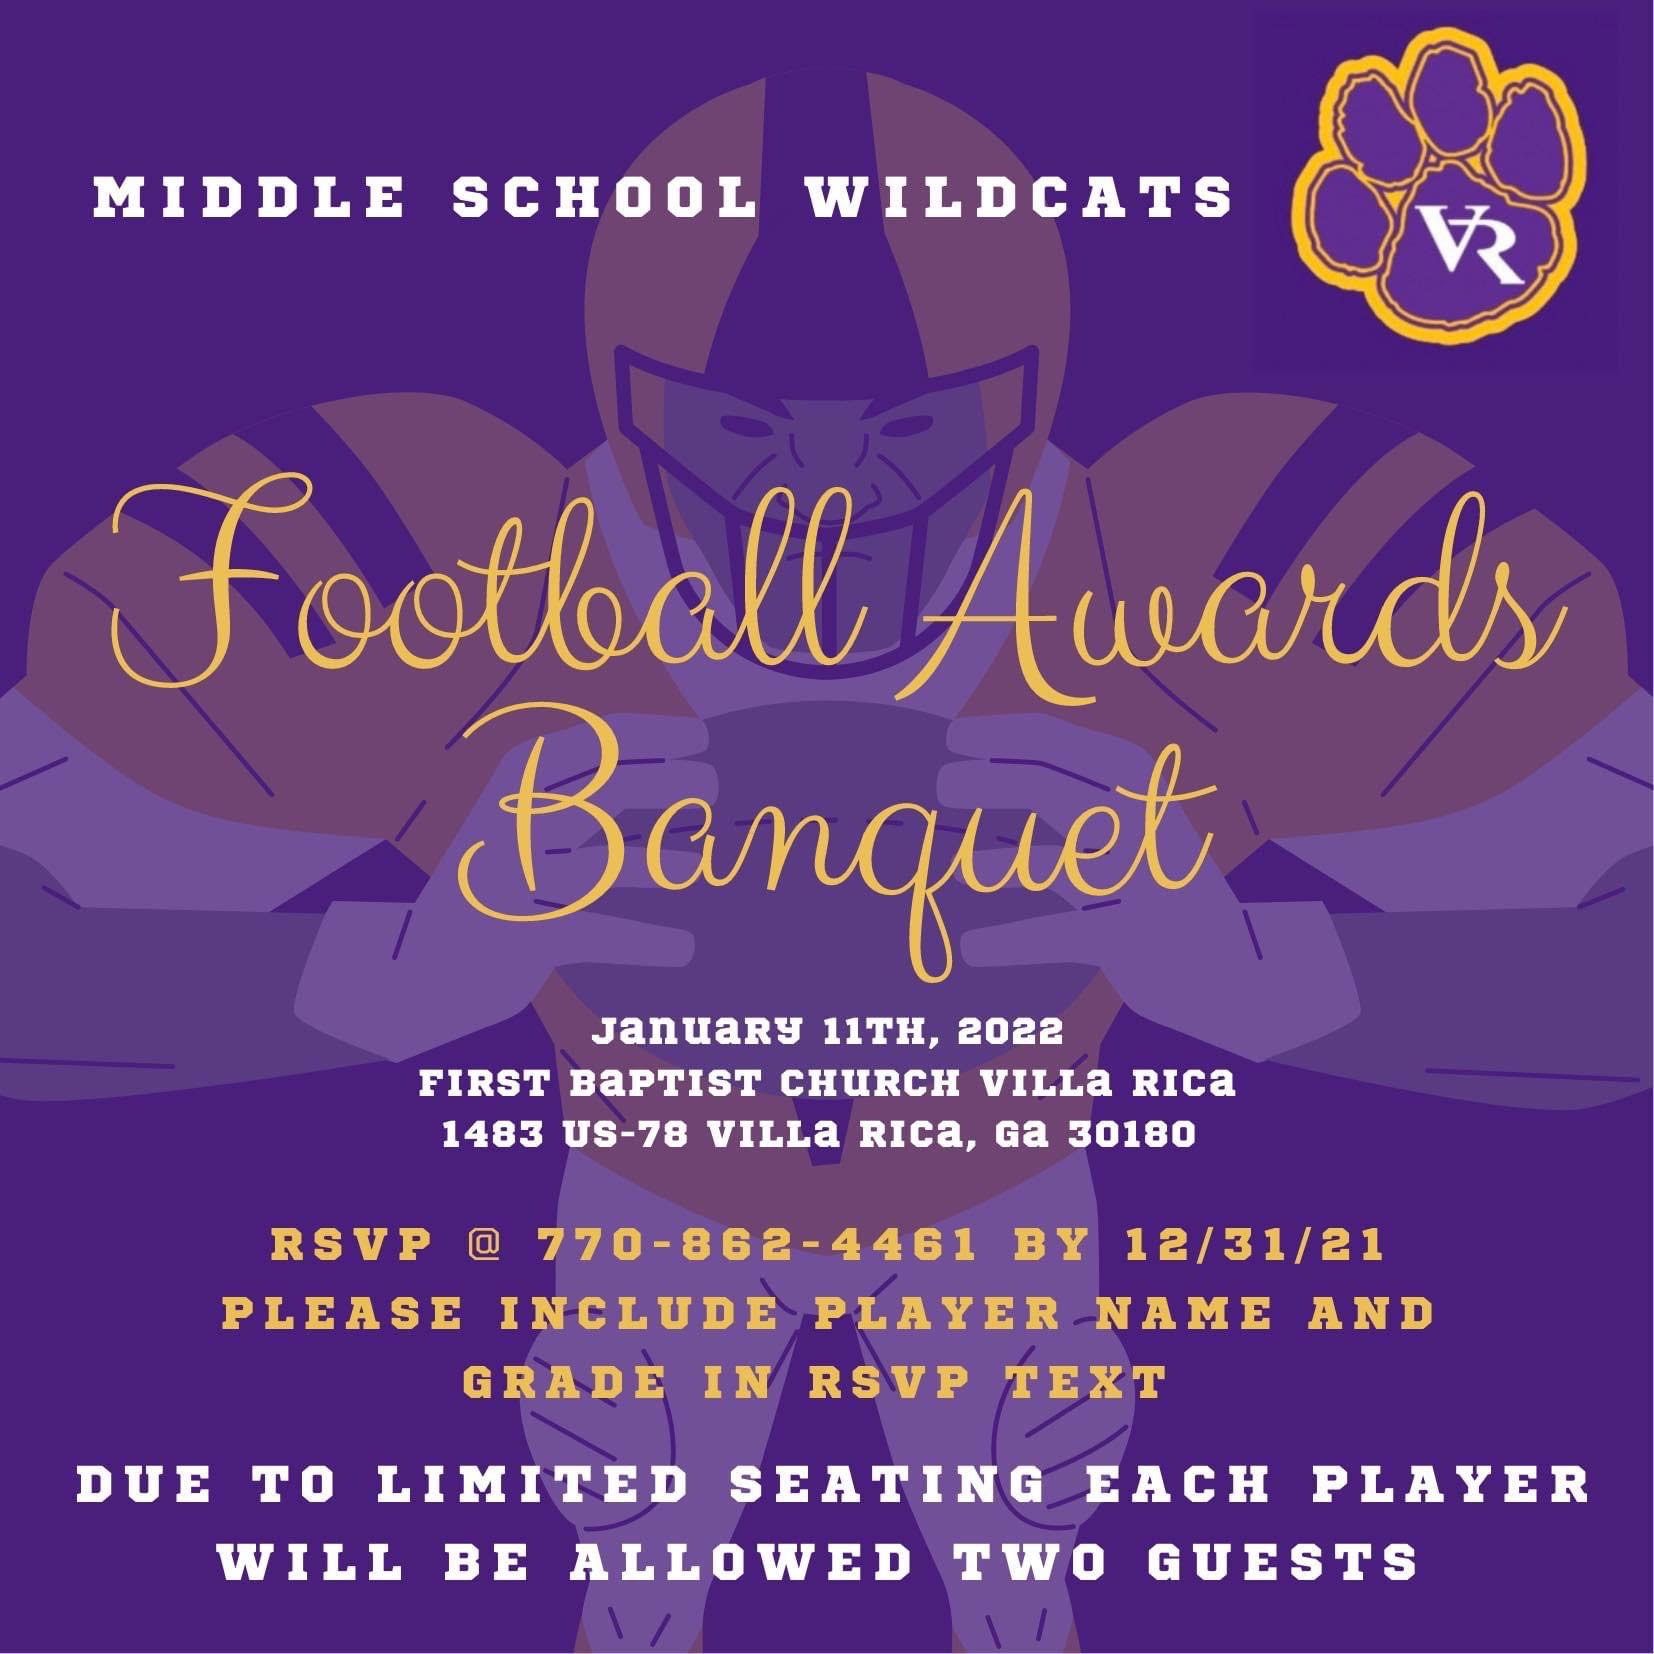 Football Banquet at First Baptist Church in Villa Rica on January 11th 